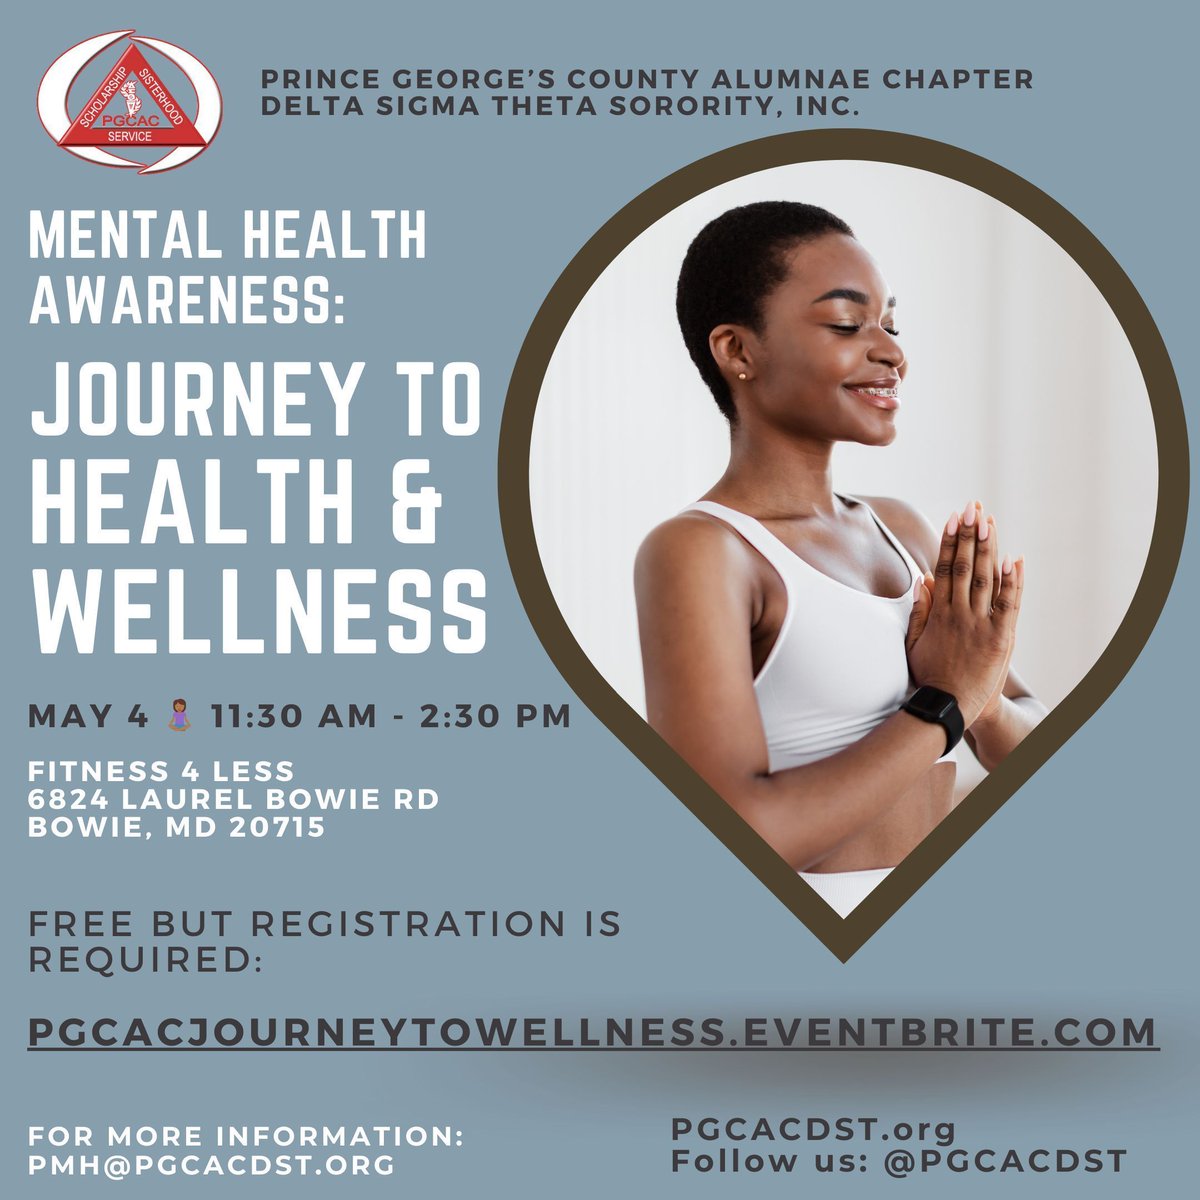 We're focusing on mental health and overall wellness at our Journey to Health & Wellness event on May 4. Join us for line dancing and yoga, too!
Register today: pgcacjourneytowellness.eventbrite.com
#PGCACDST #JourneytoWellness